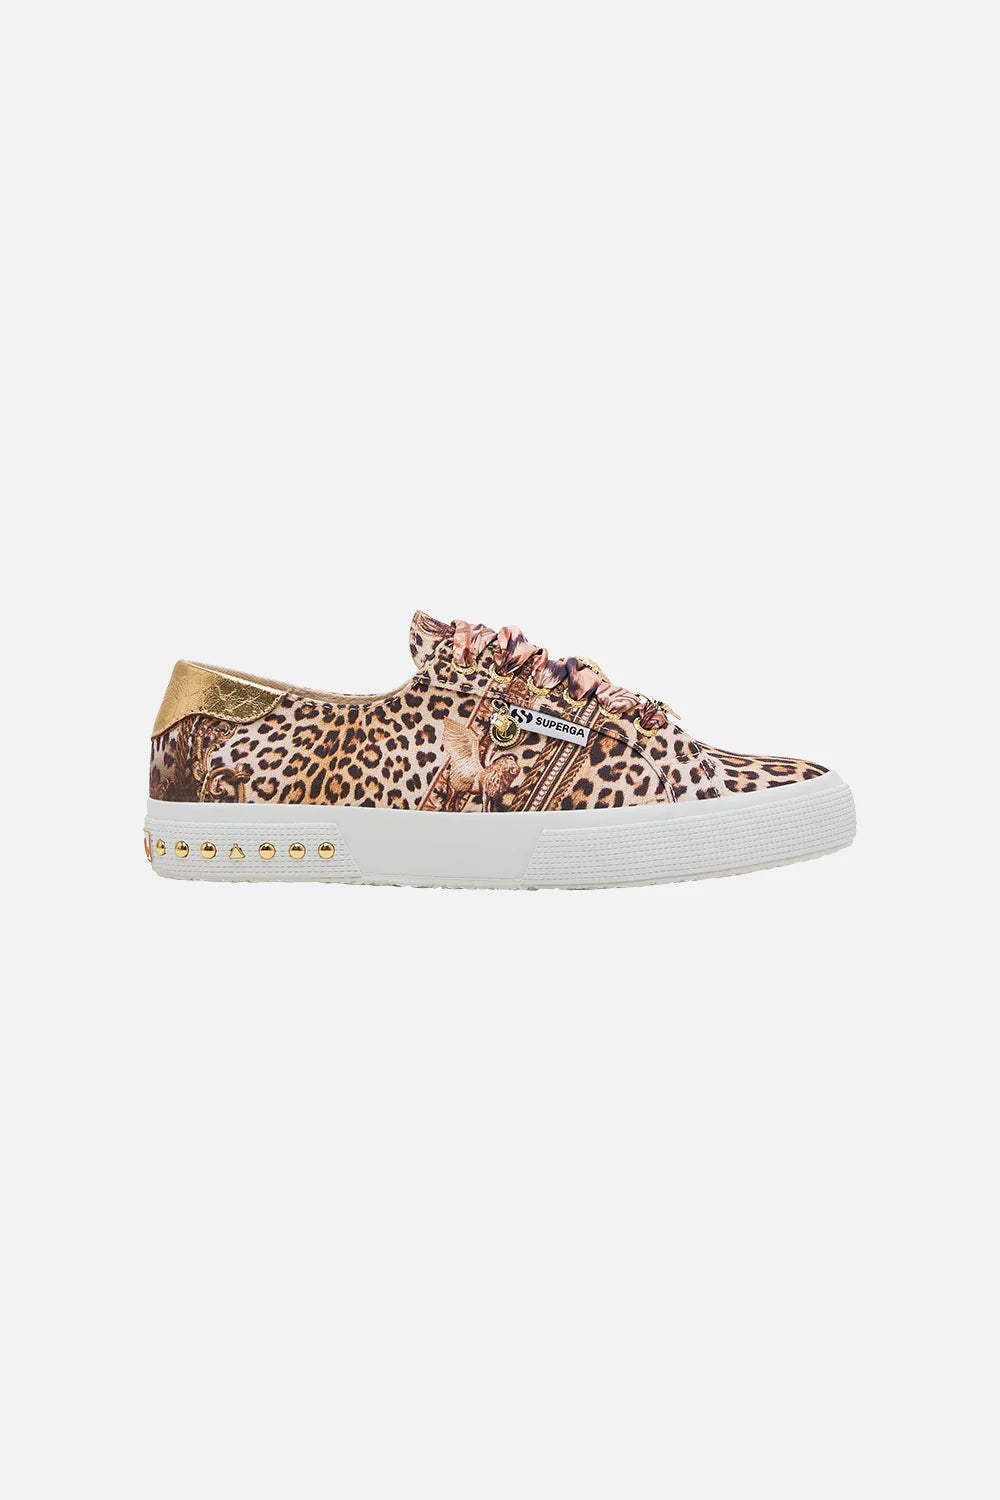 Camilla X Superga Standing Ovation Printed Sneakers